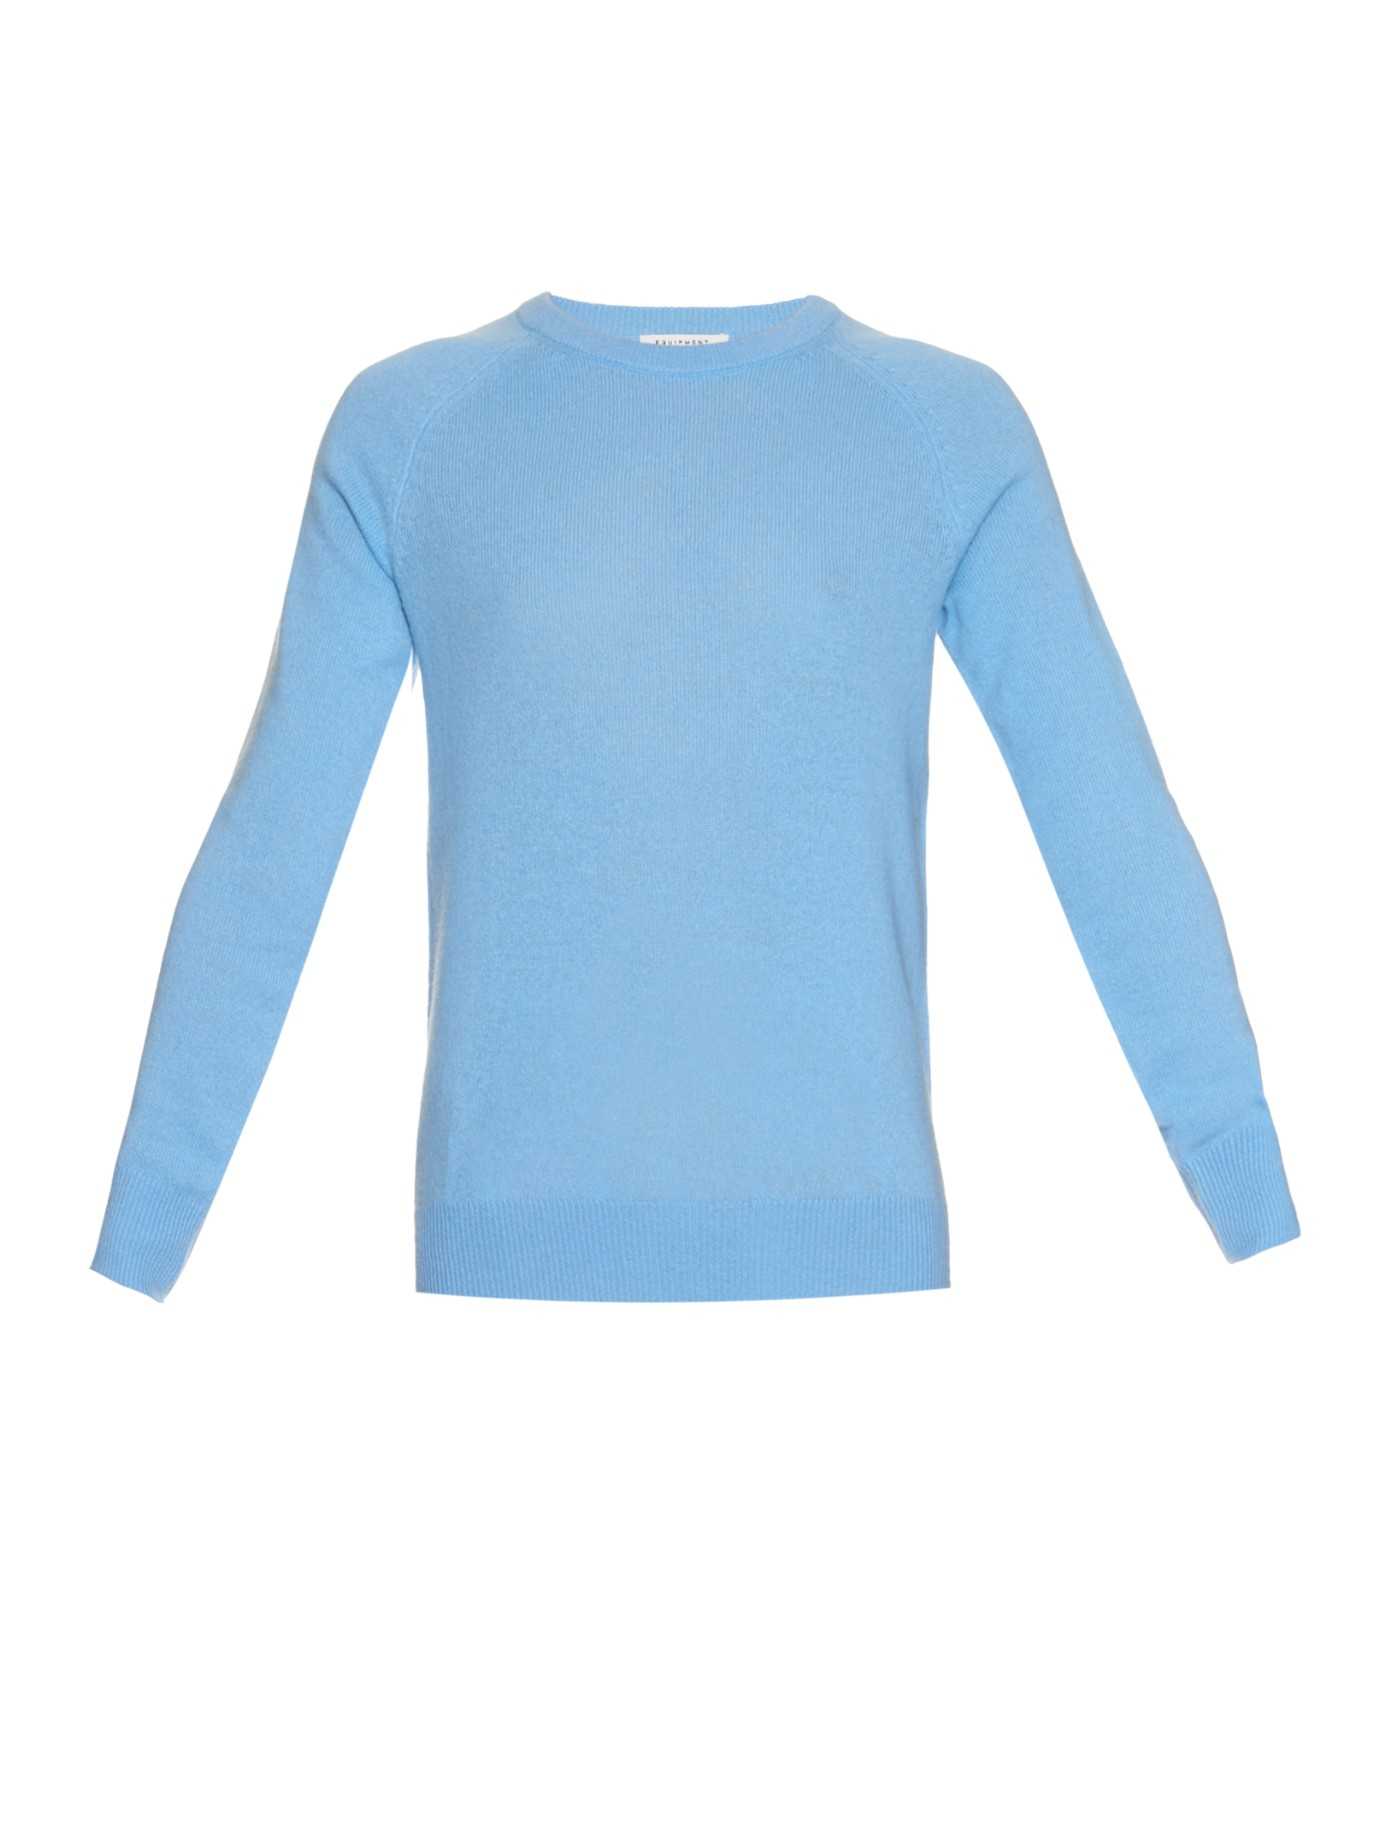 Equipment Sloane Cashmere Sweater in Blue | Lyst